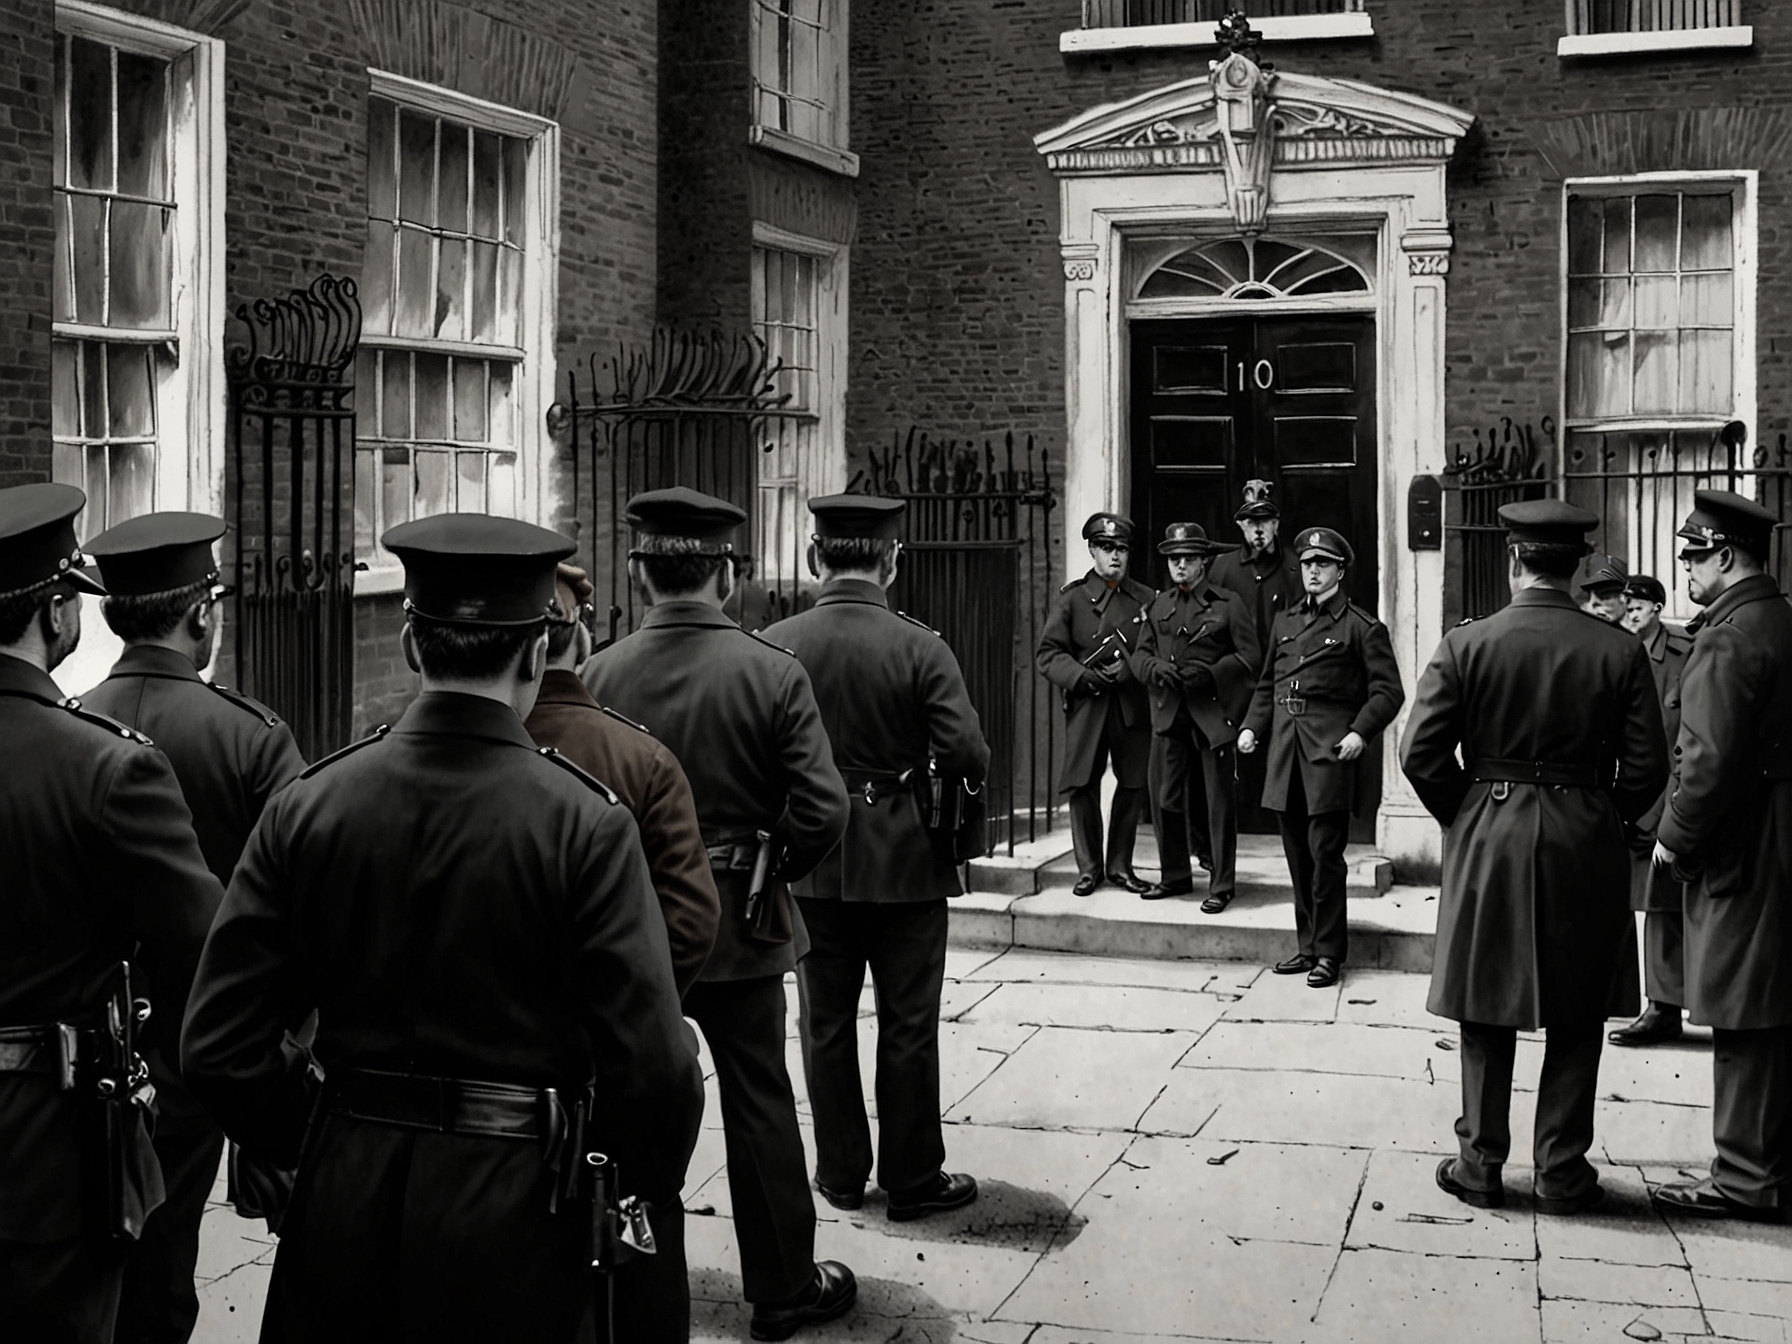 A historical police raid scene showing officers at 34 Montagu Square, London, where Lennon was arrested, highlighting the incident's intensity and media attention.